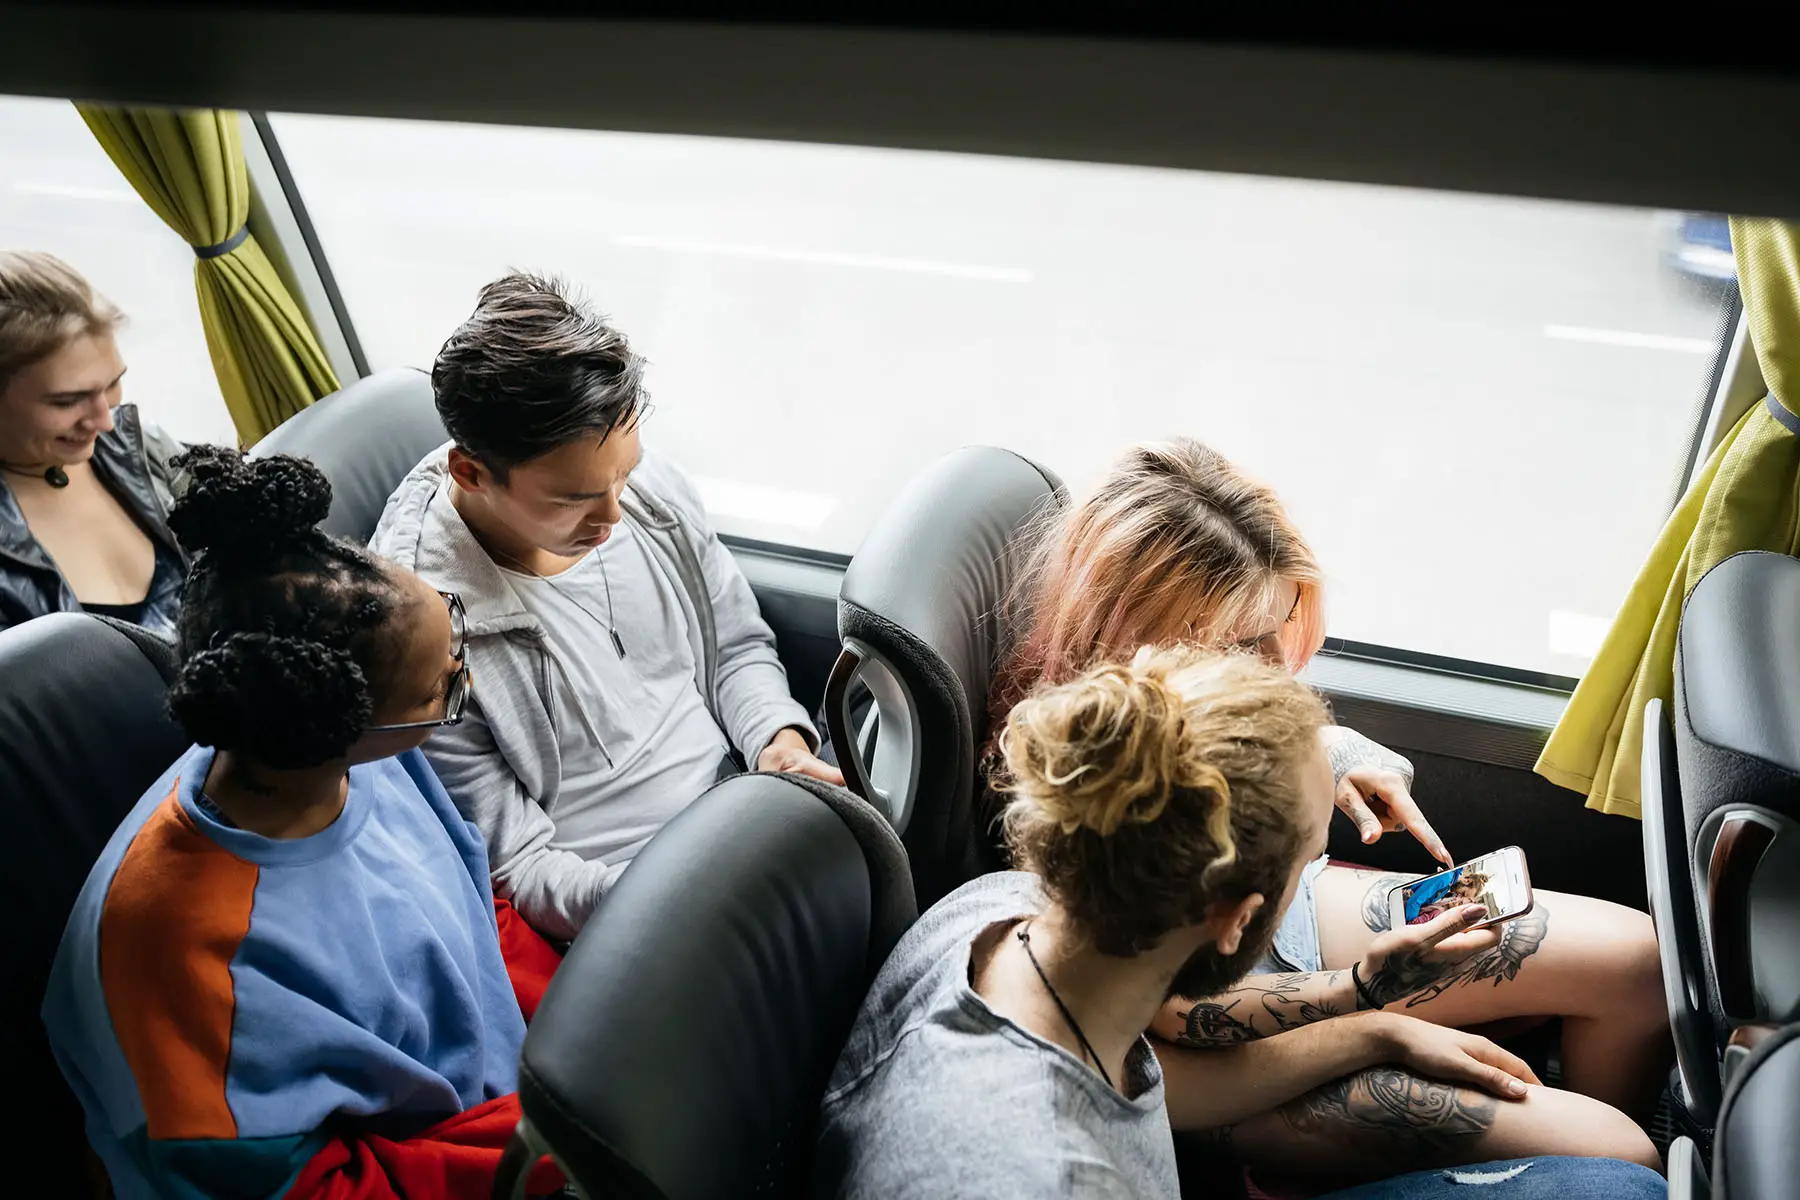 A young group of friends looking over recent photos of their travels as they journey together on a bus.